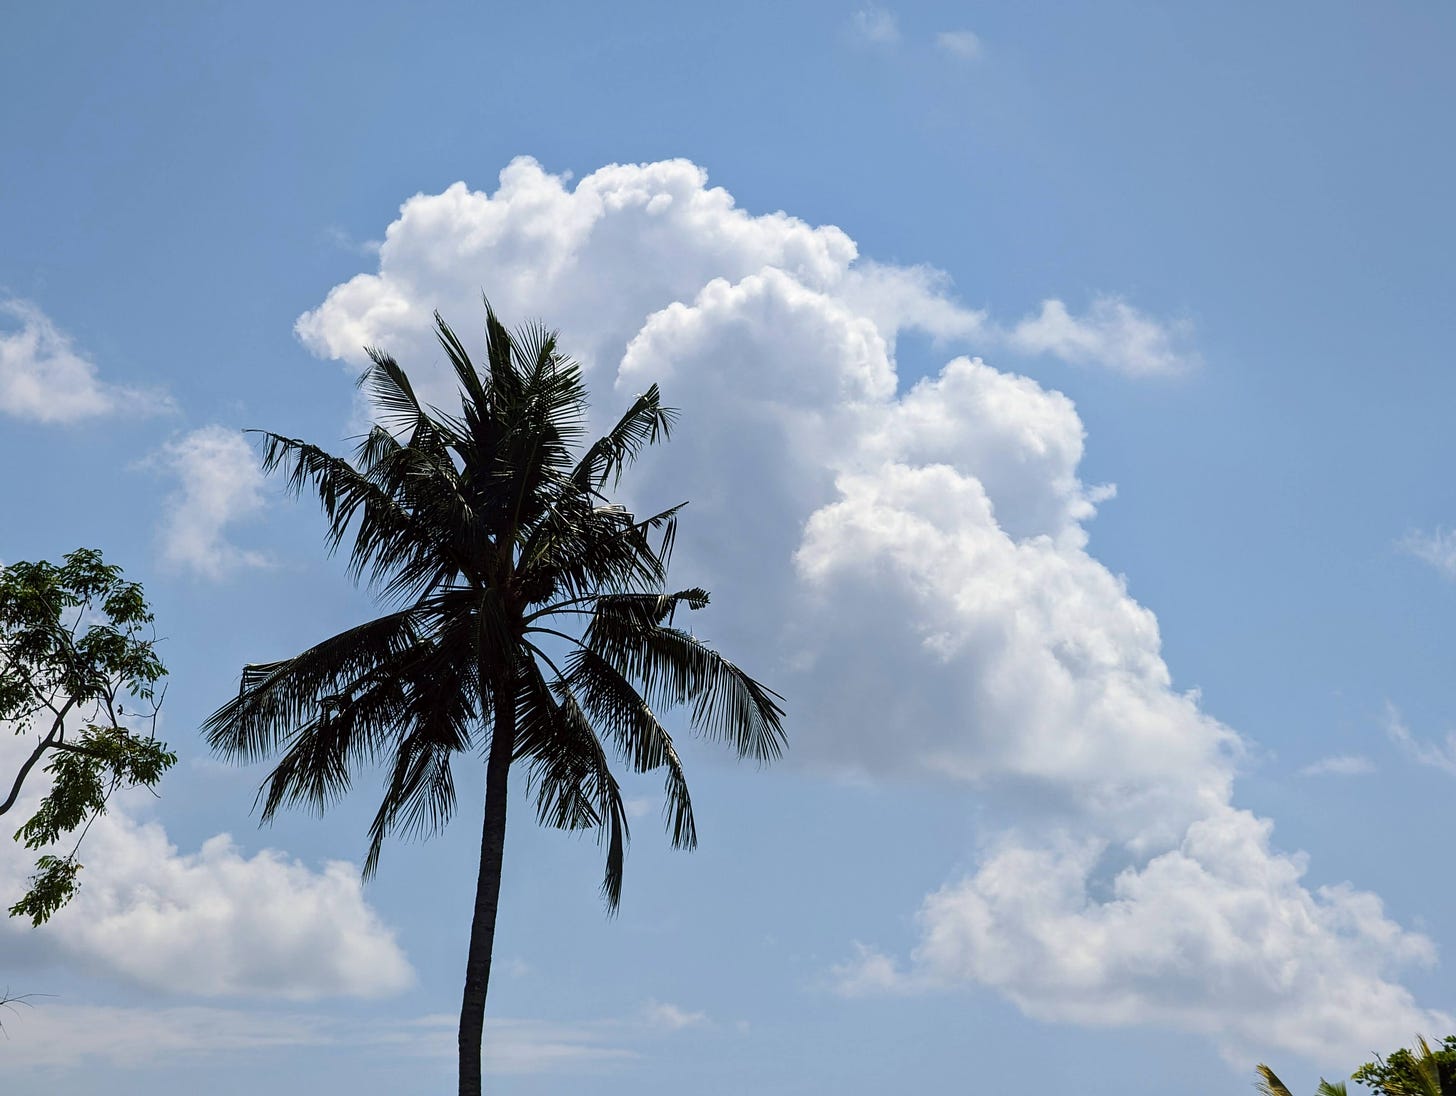 A palm tree in the foreground with white clouds and blue sky in the background